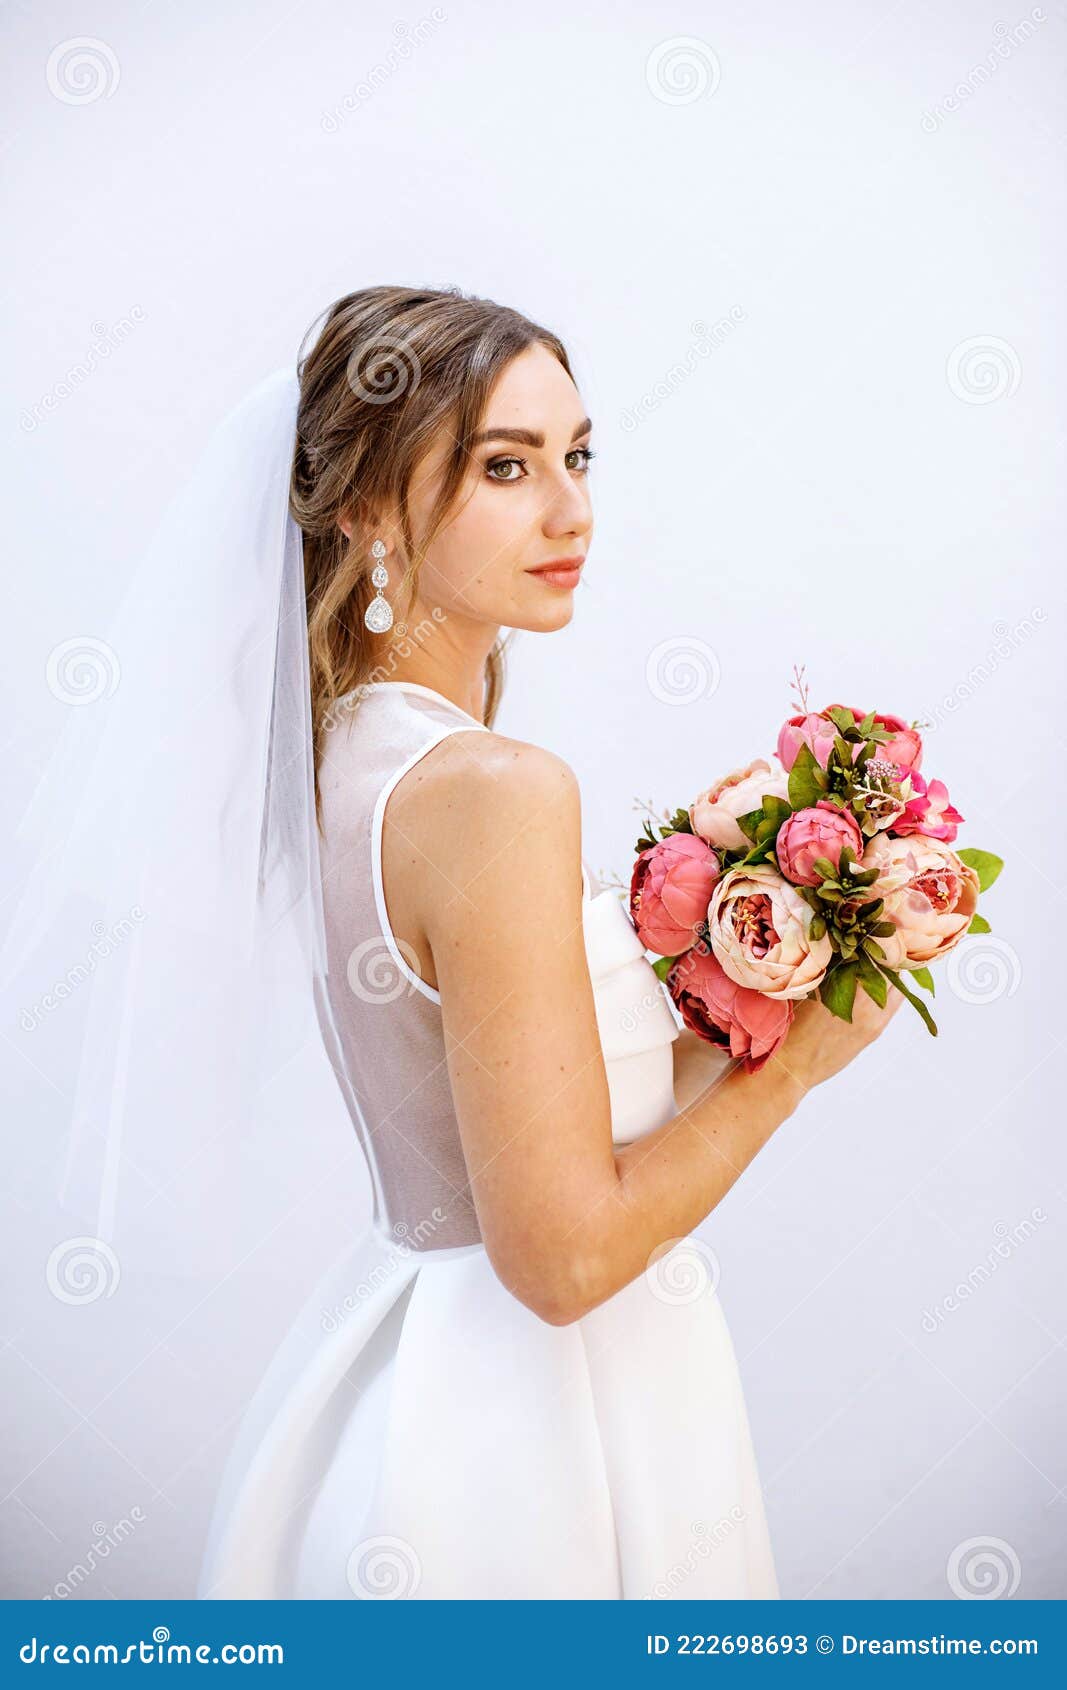 brunette girl in a wedding dress. bride in a white dress with a bouquet in her hands. makeup.